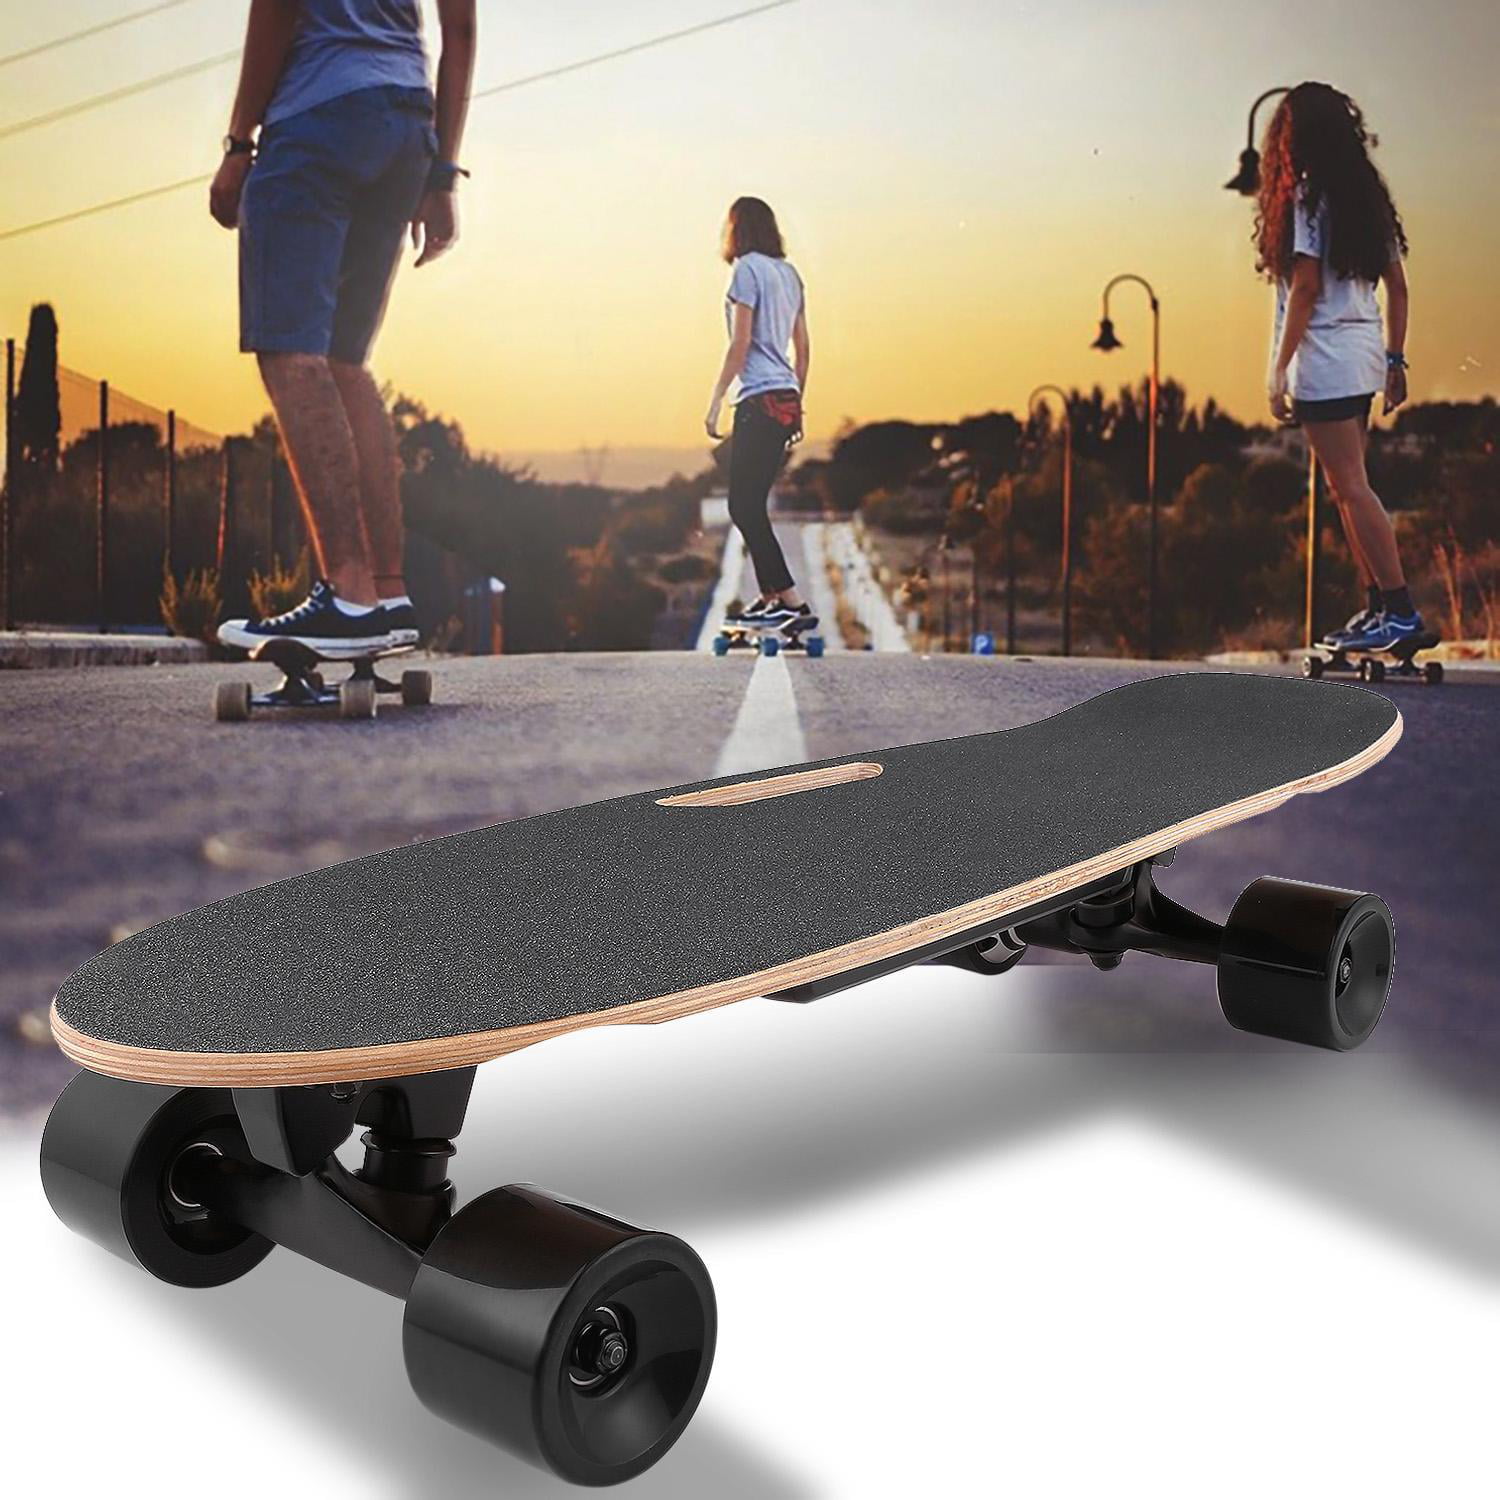 Details about   Electric Skateboard Cruiser 7 Layers Maple Longboard with Remote Control B e 51 